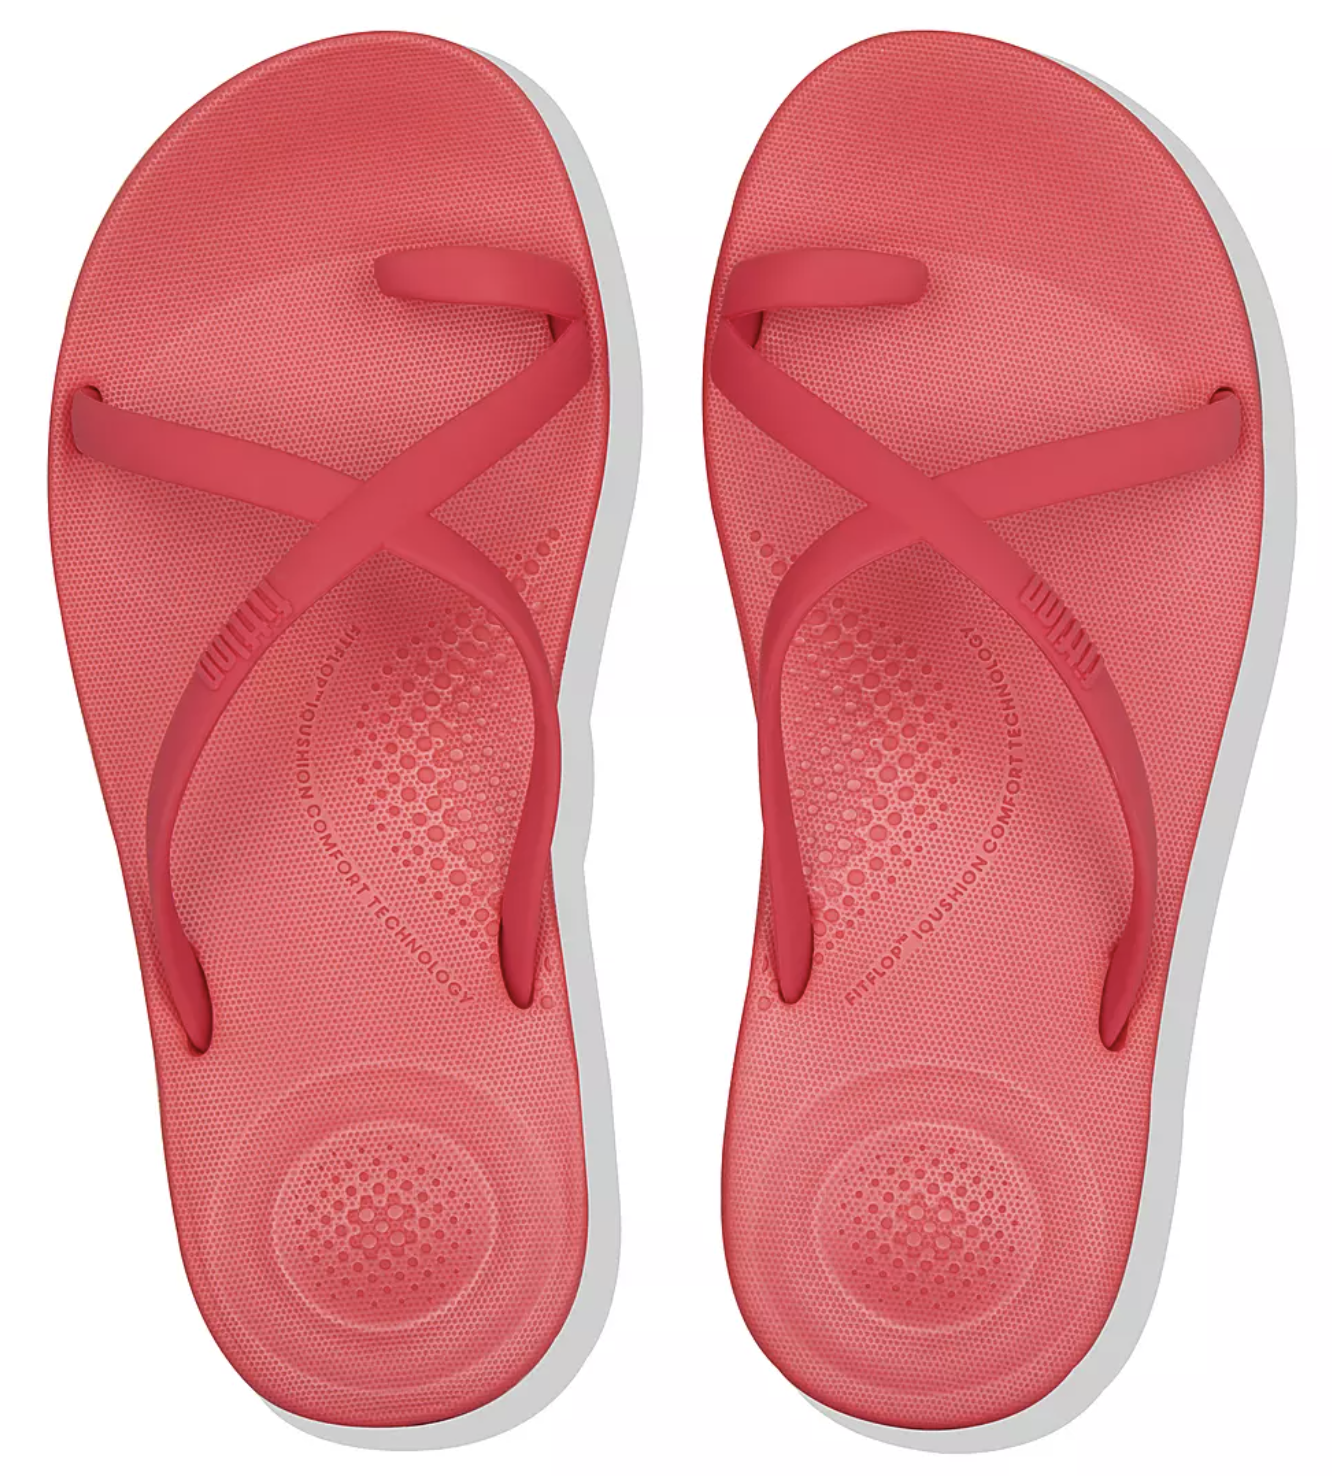 cheapest place to buy fitflops